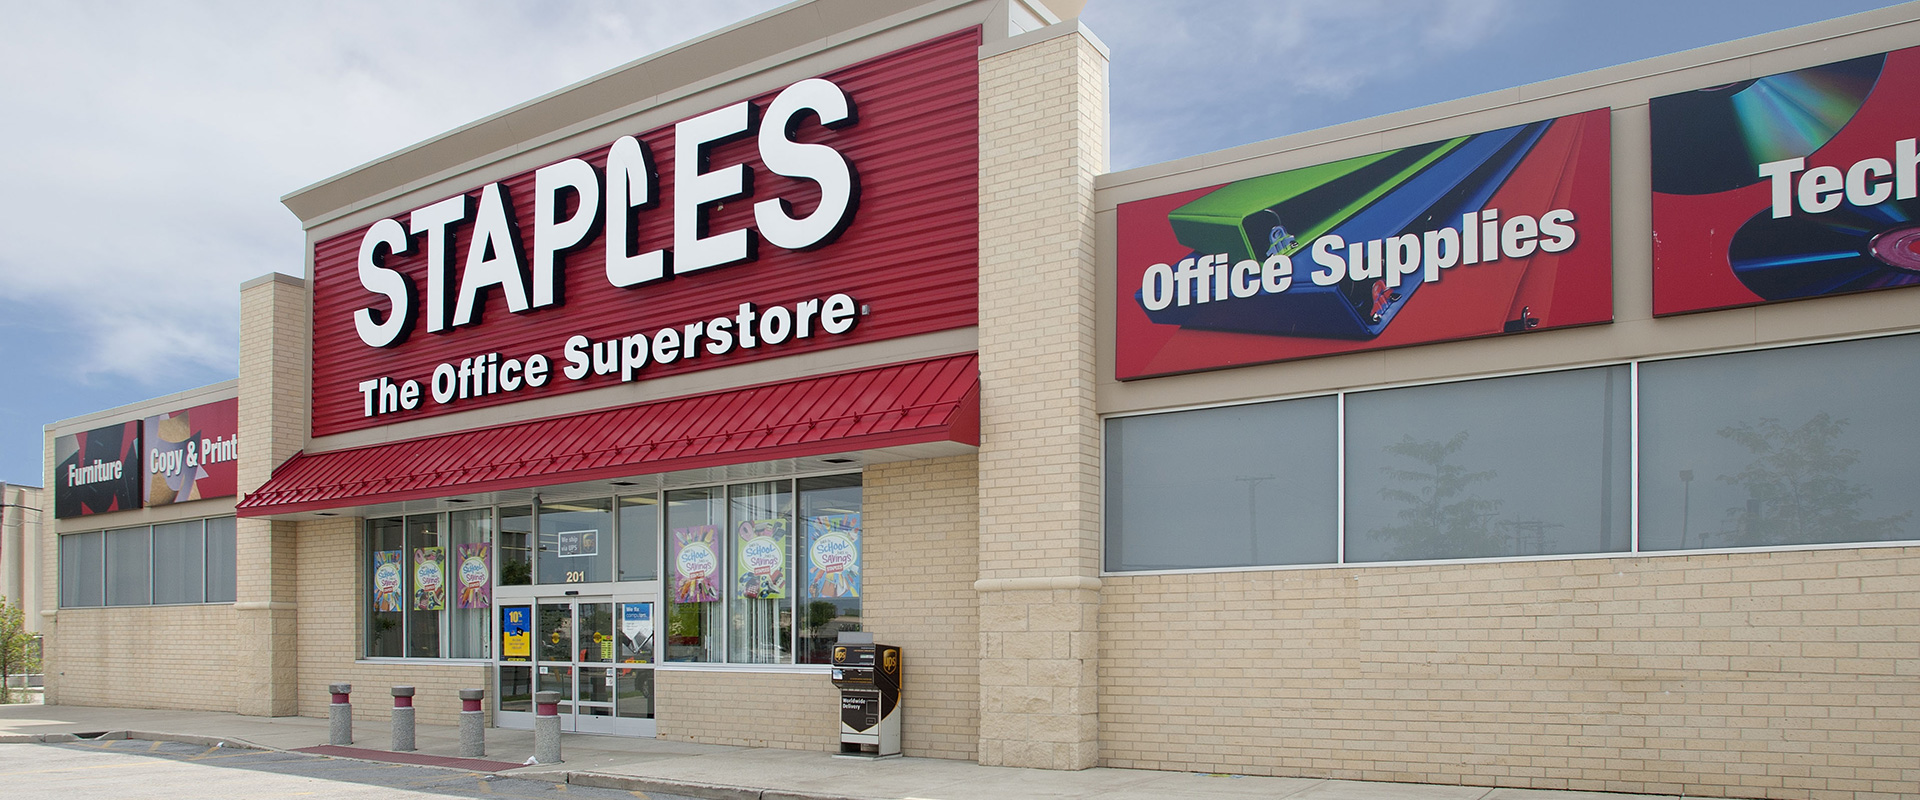 ®  Staples, The Office Superstore